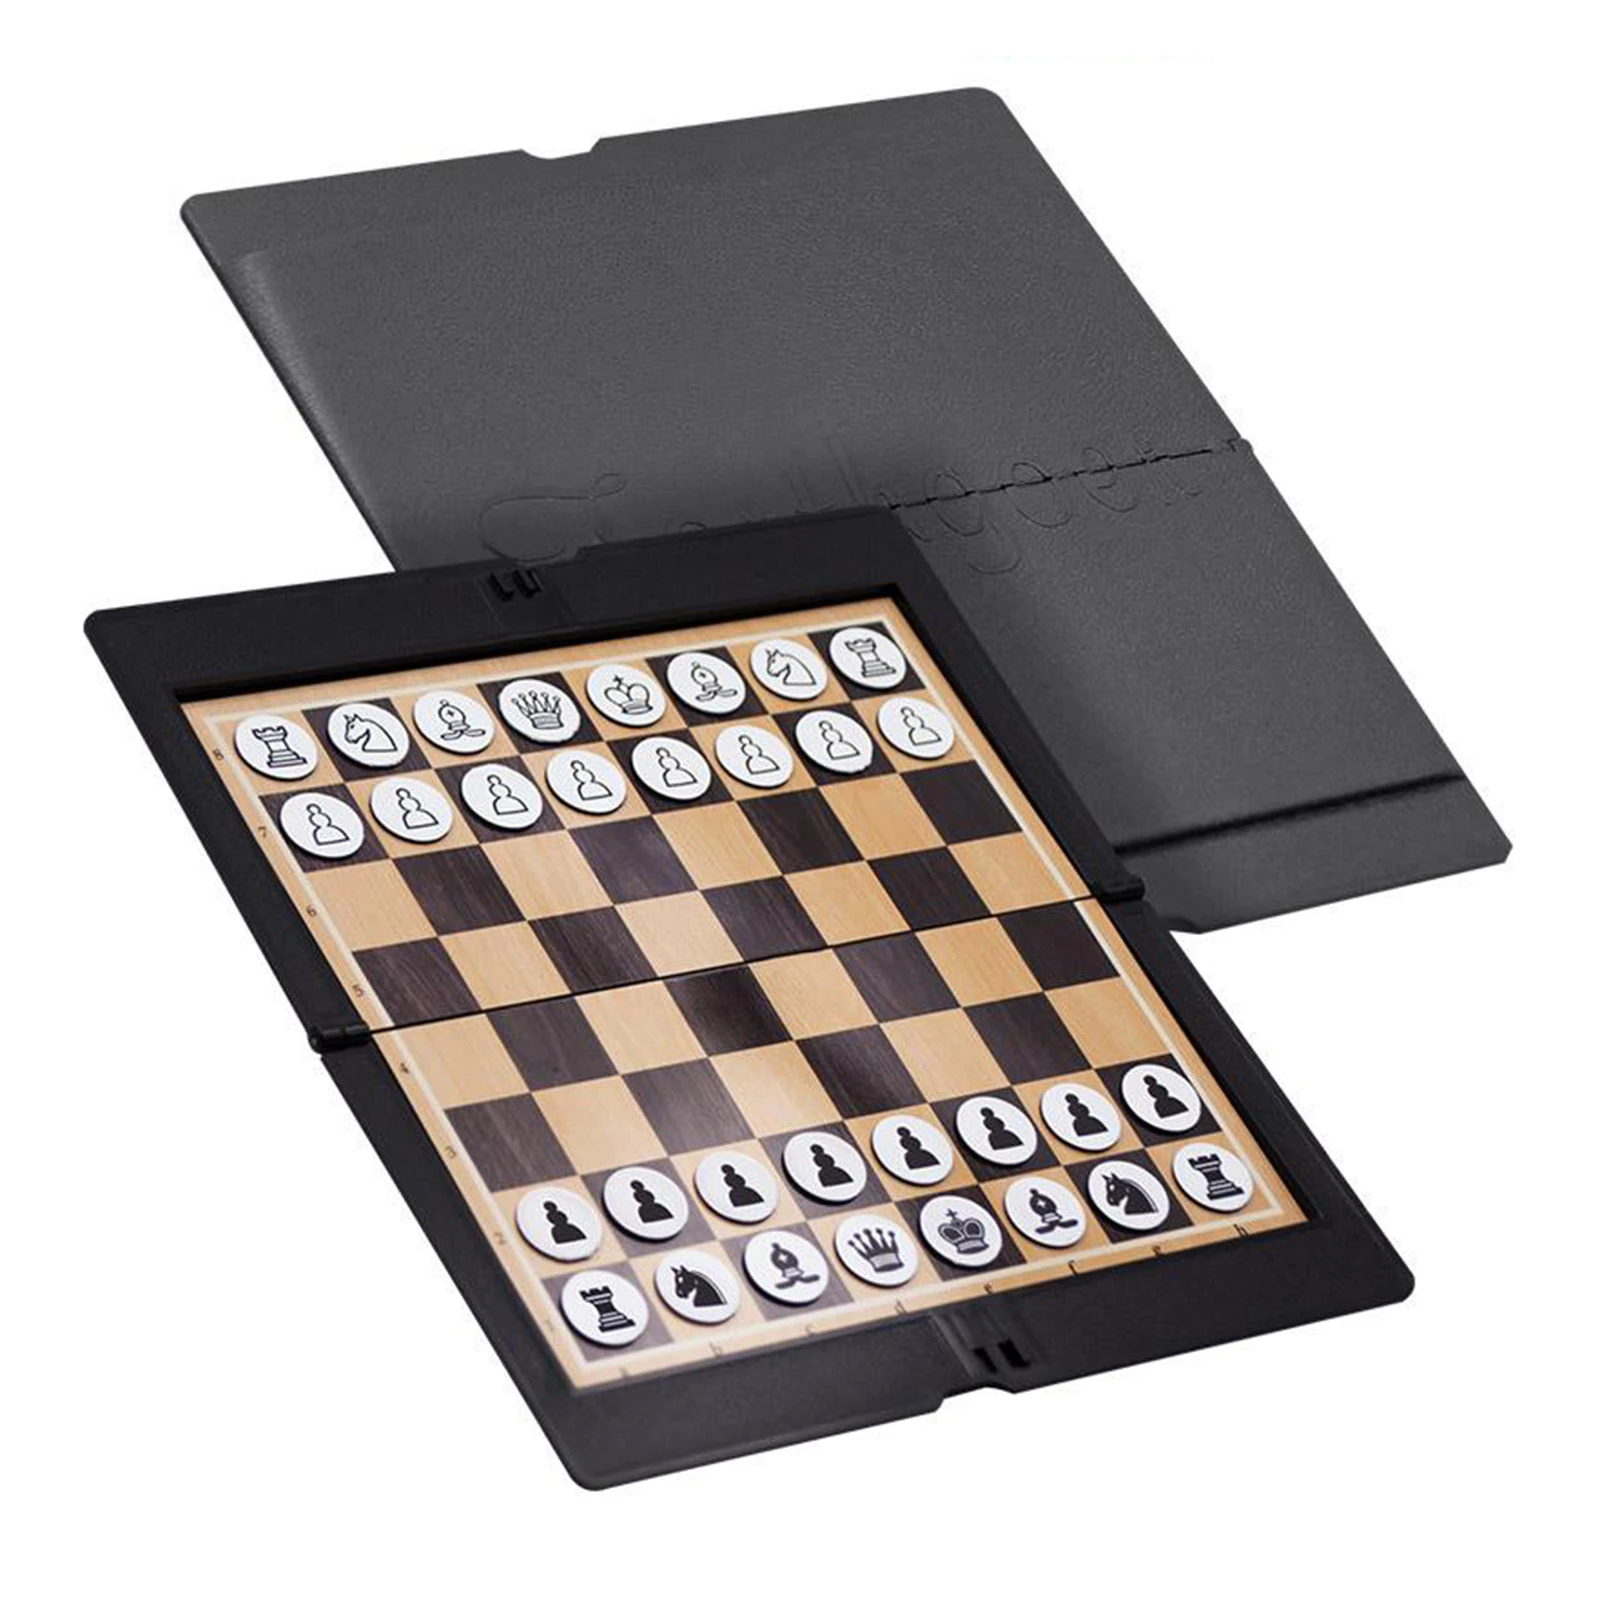 Best Wooden Magnetic Chess Set 7"x7" Folding Box with 32 Magnetic Chess Pieces 